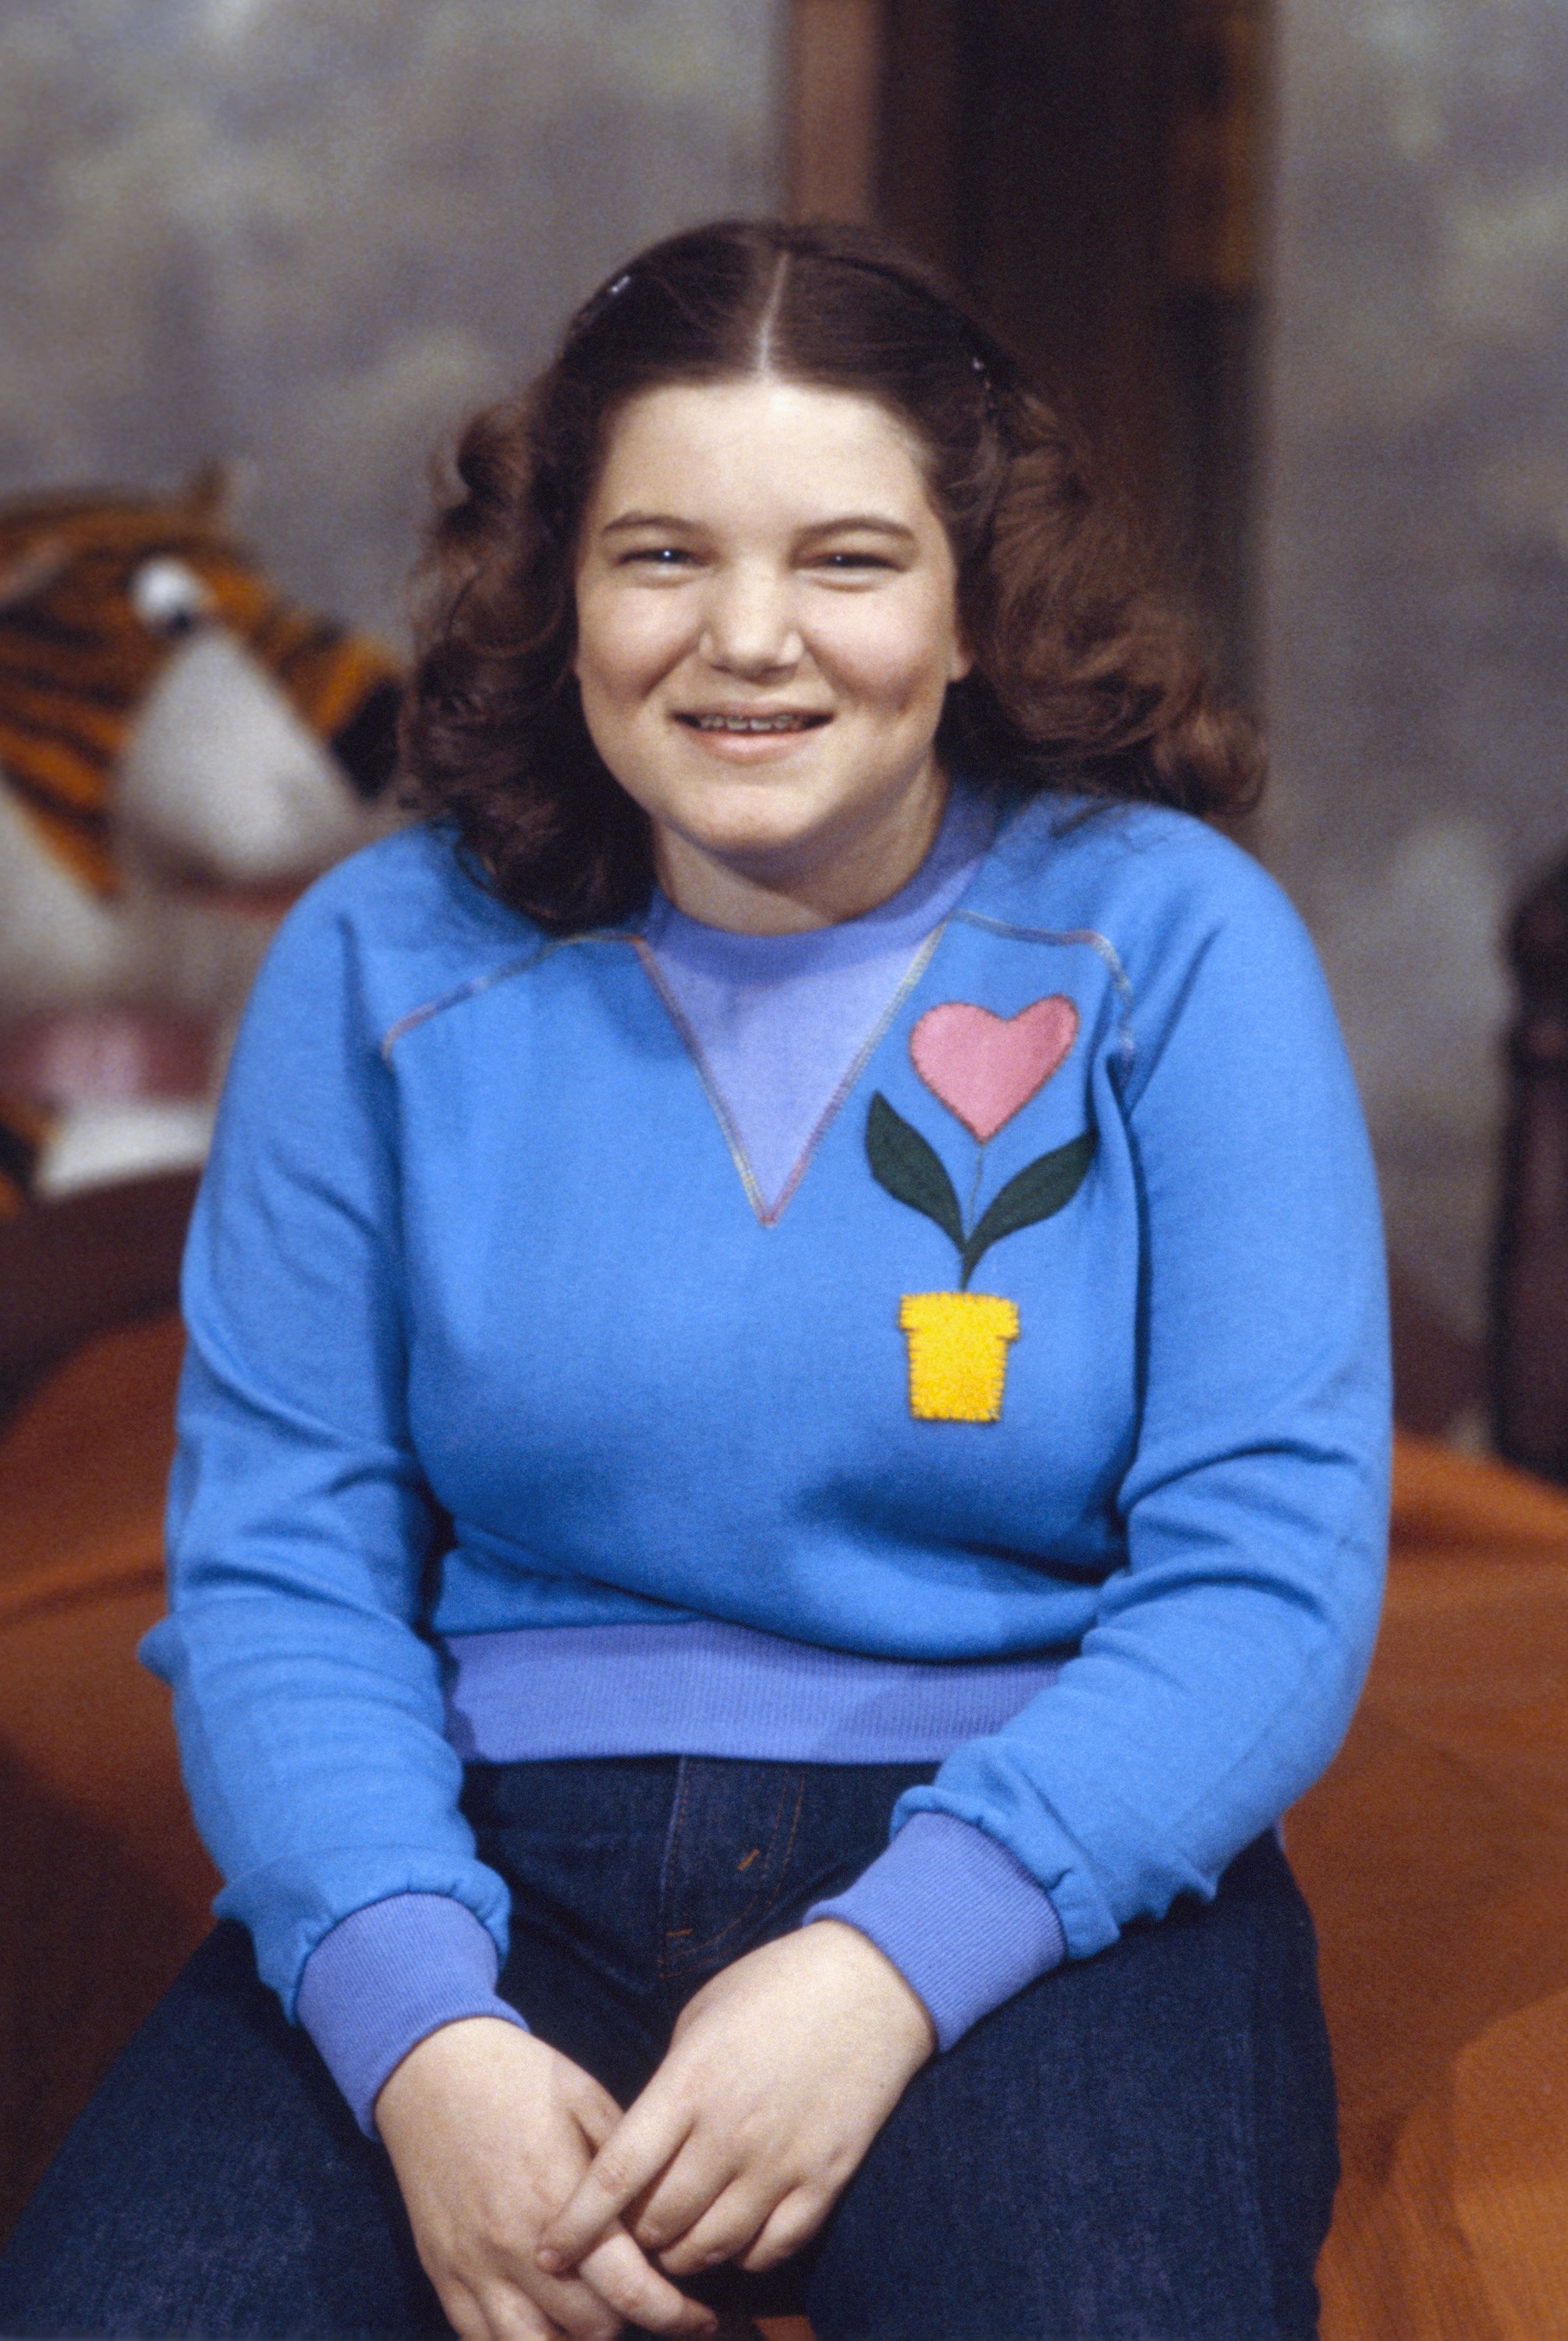 Mindy Cohn as Natalie Green on "The Facts of Life" circa 1979 | Source: Getty Images